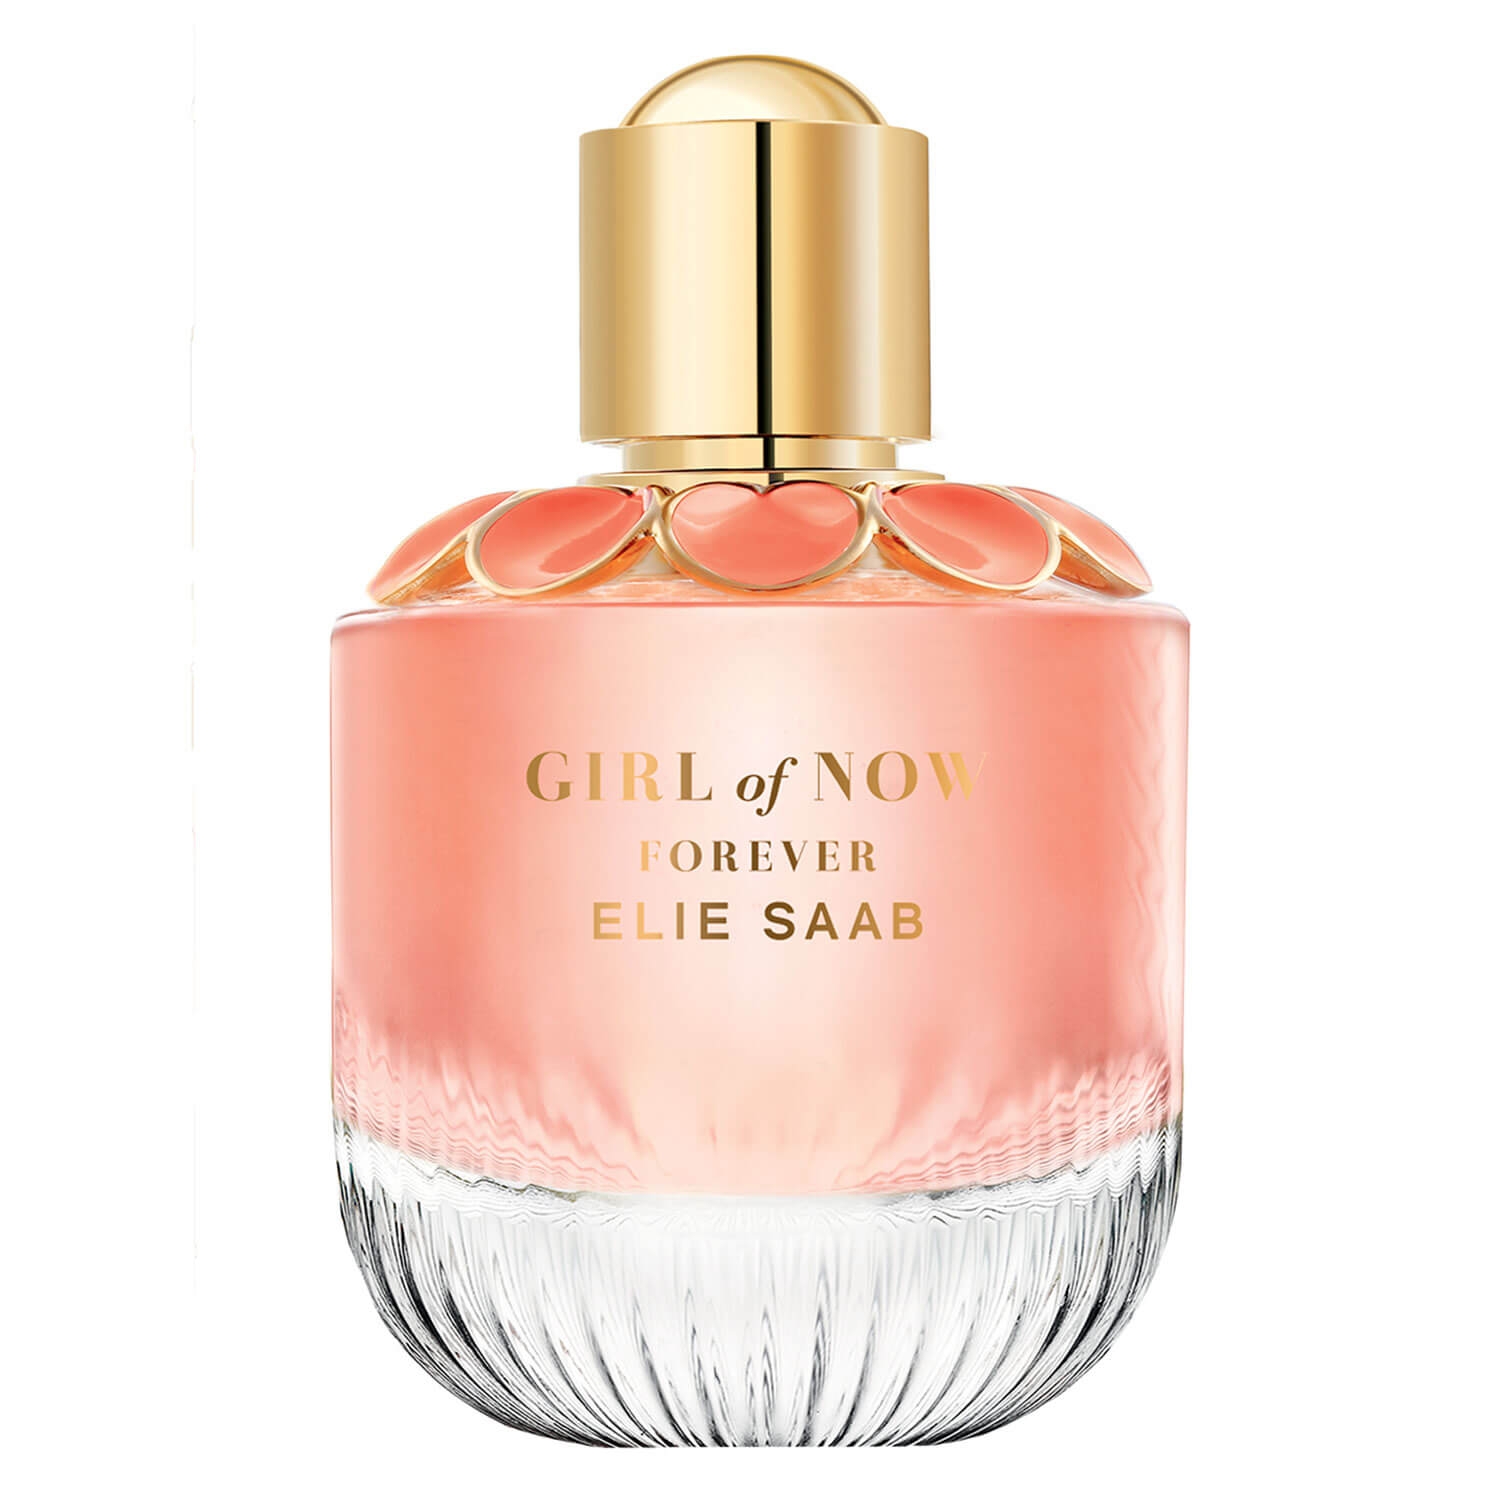 Product image from Girl of Now - Forever Eau de Parfum